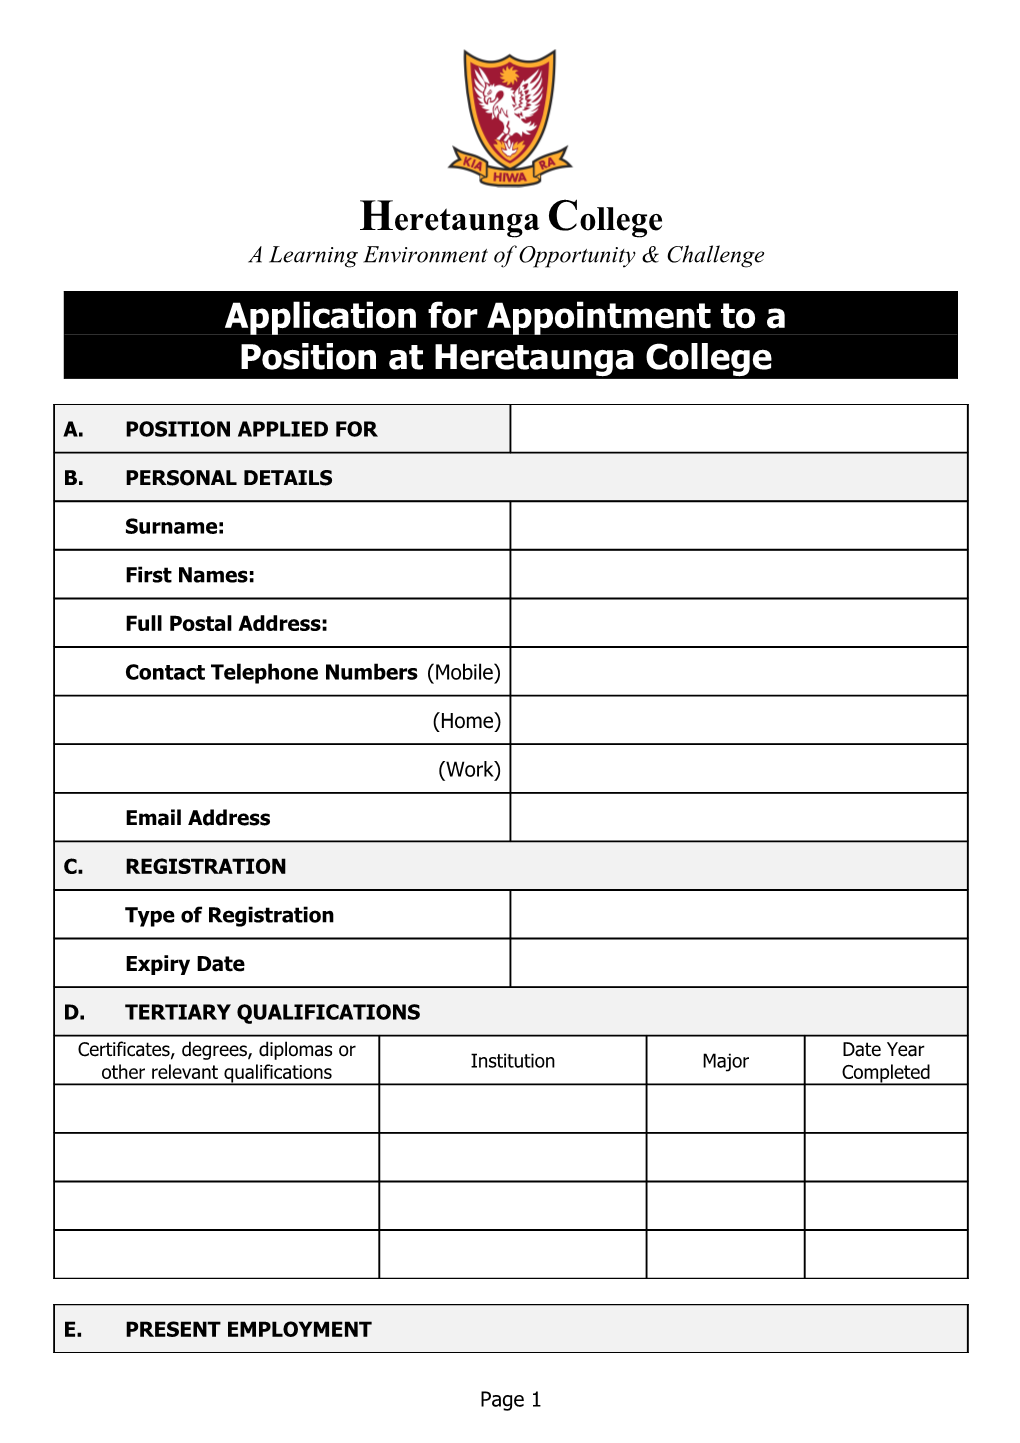 Application for Appointment to a Position